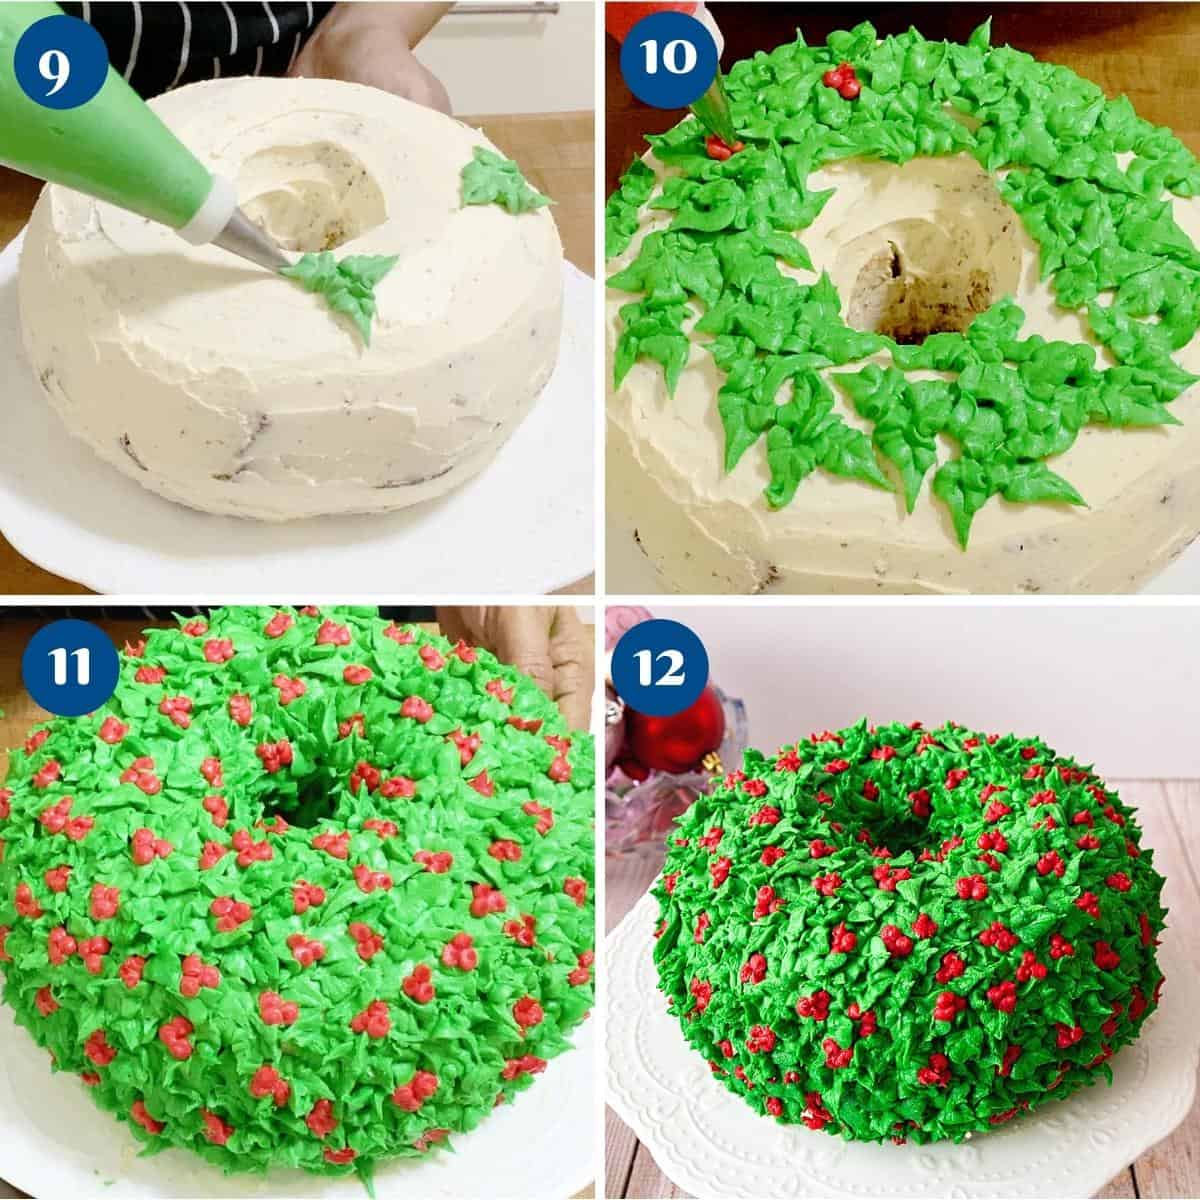 Progress pictures buttercream wreath cake for Christmas.